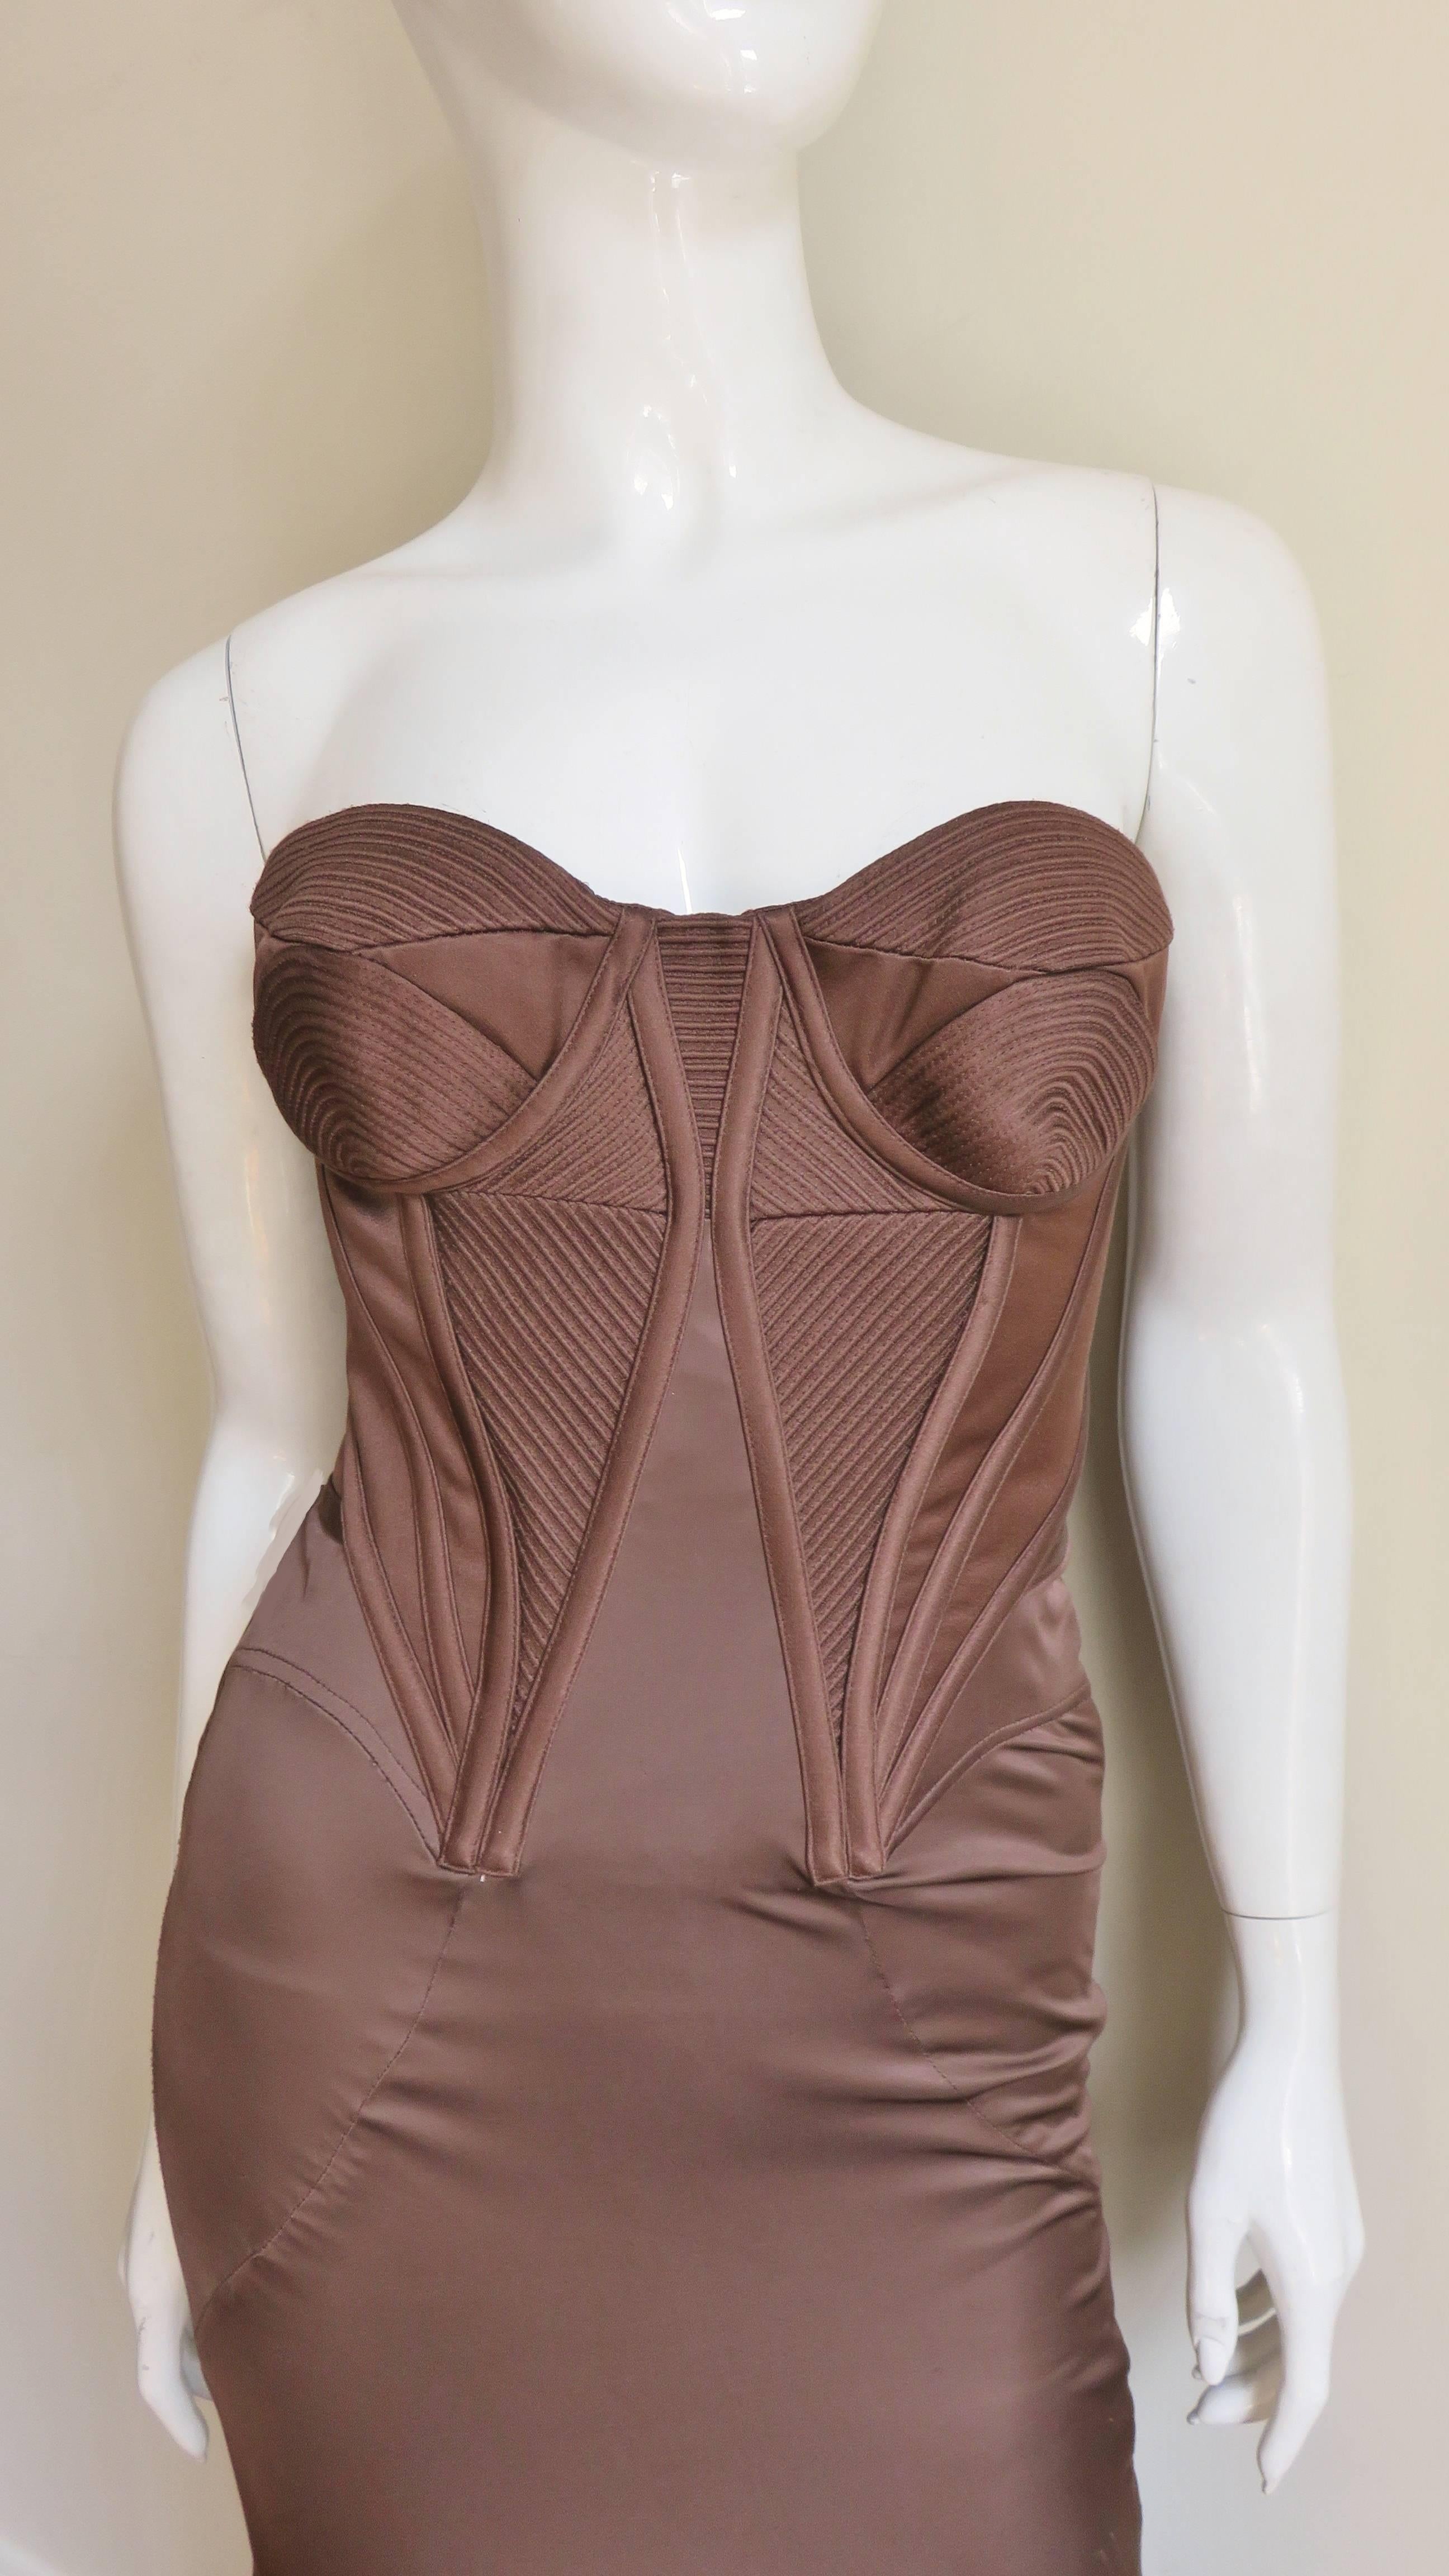 This is a stunning rich chocolate brown silk gown from Versace.  The strapless bodice has formed detailed cups, boning at angles and intricate stitching patterns throughout both front and back all contributing to a fabulous fit and cinched waist. 